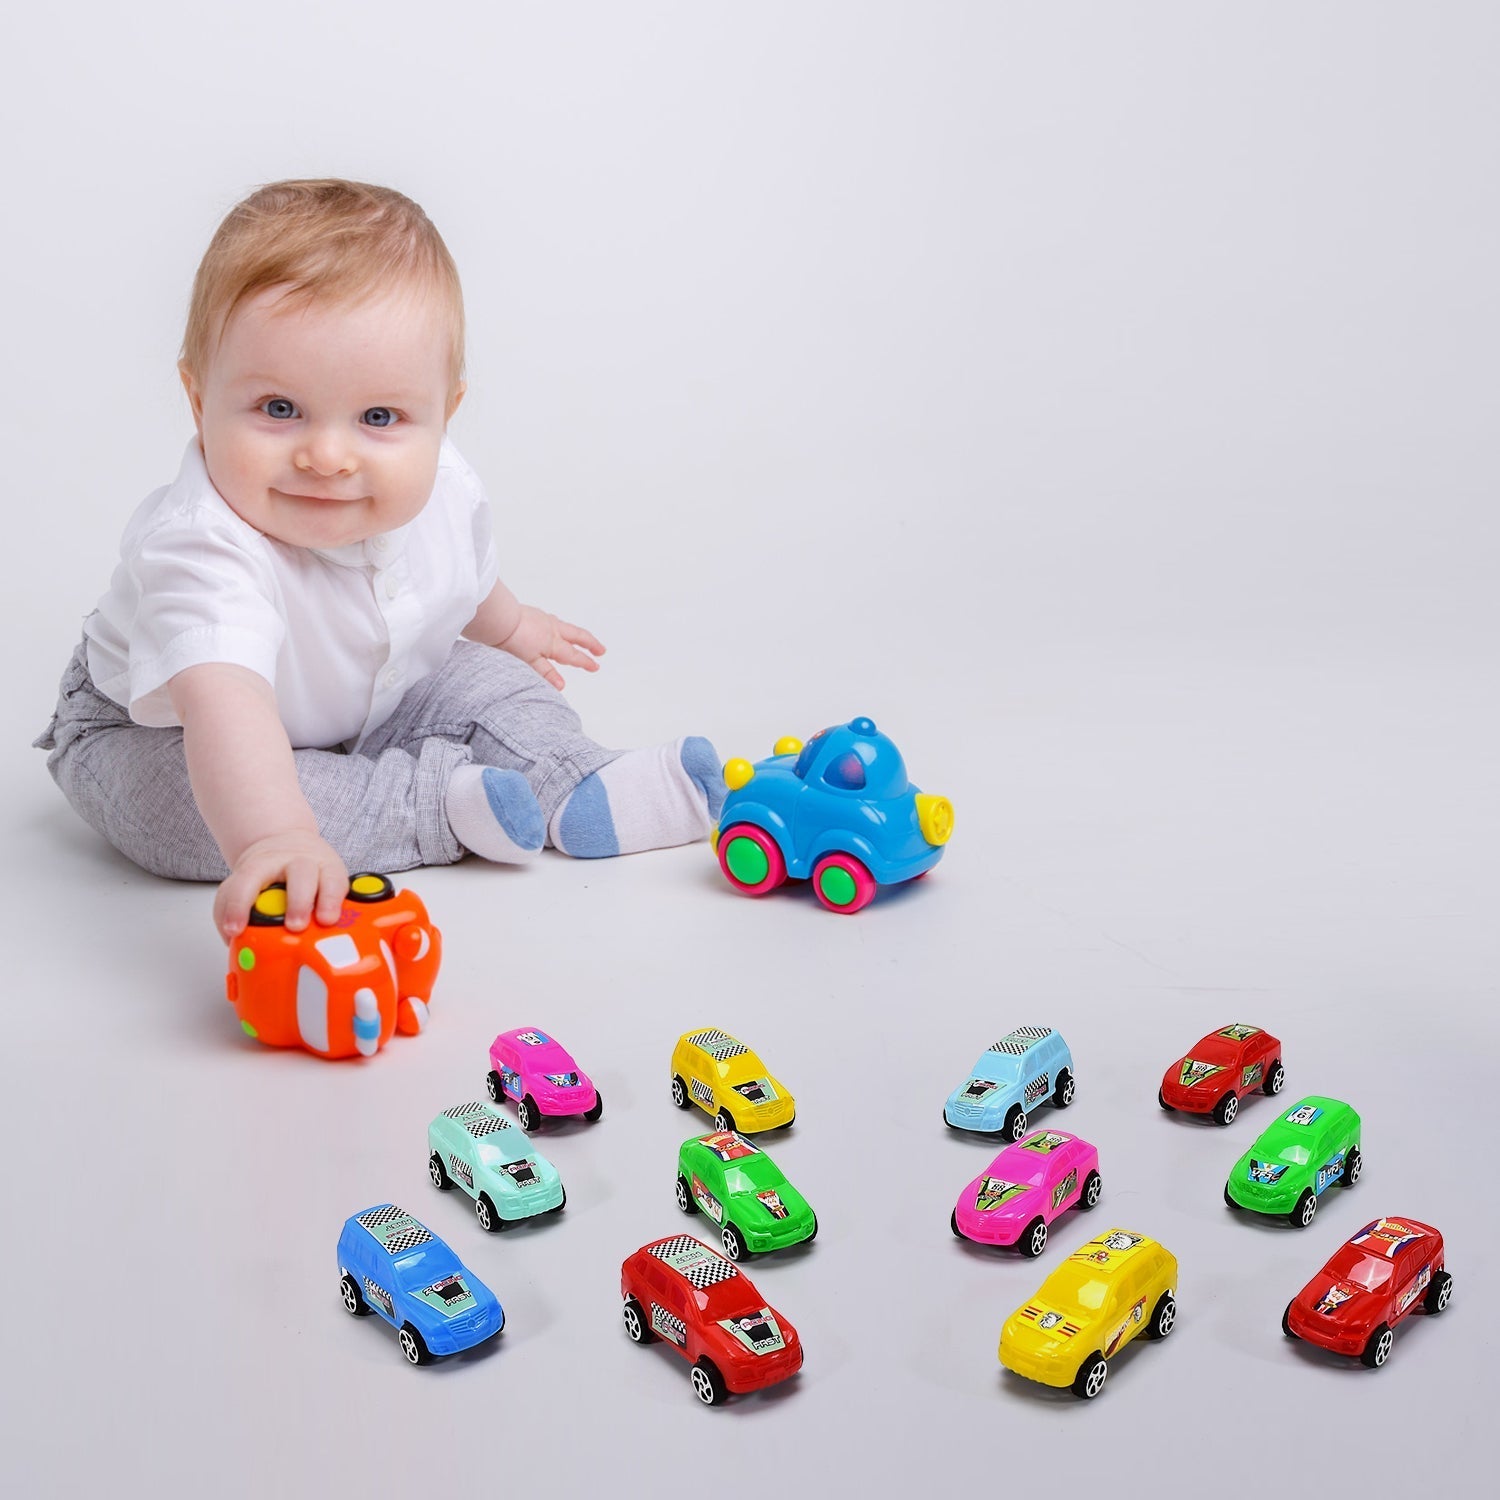 4453 Super City Car Racer Toy For Boys and Girls Pull Push Vehicle Car (Set Of 12Pcs)  (Multicolor) 